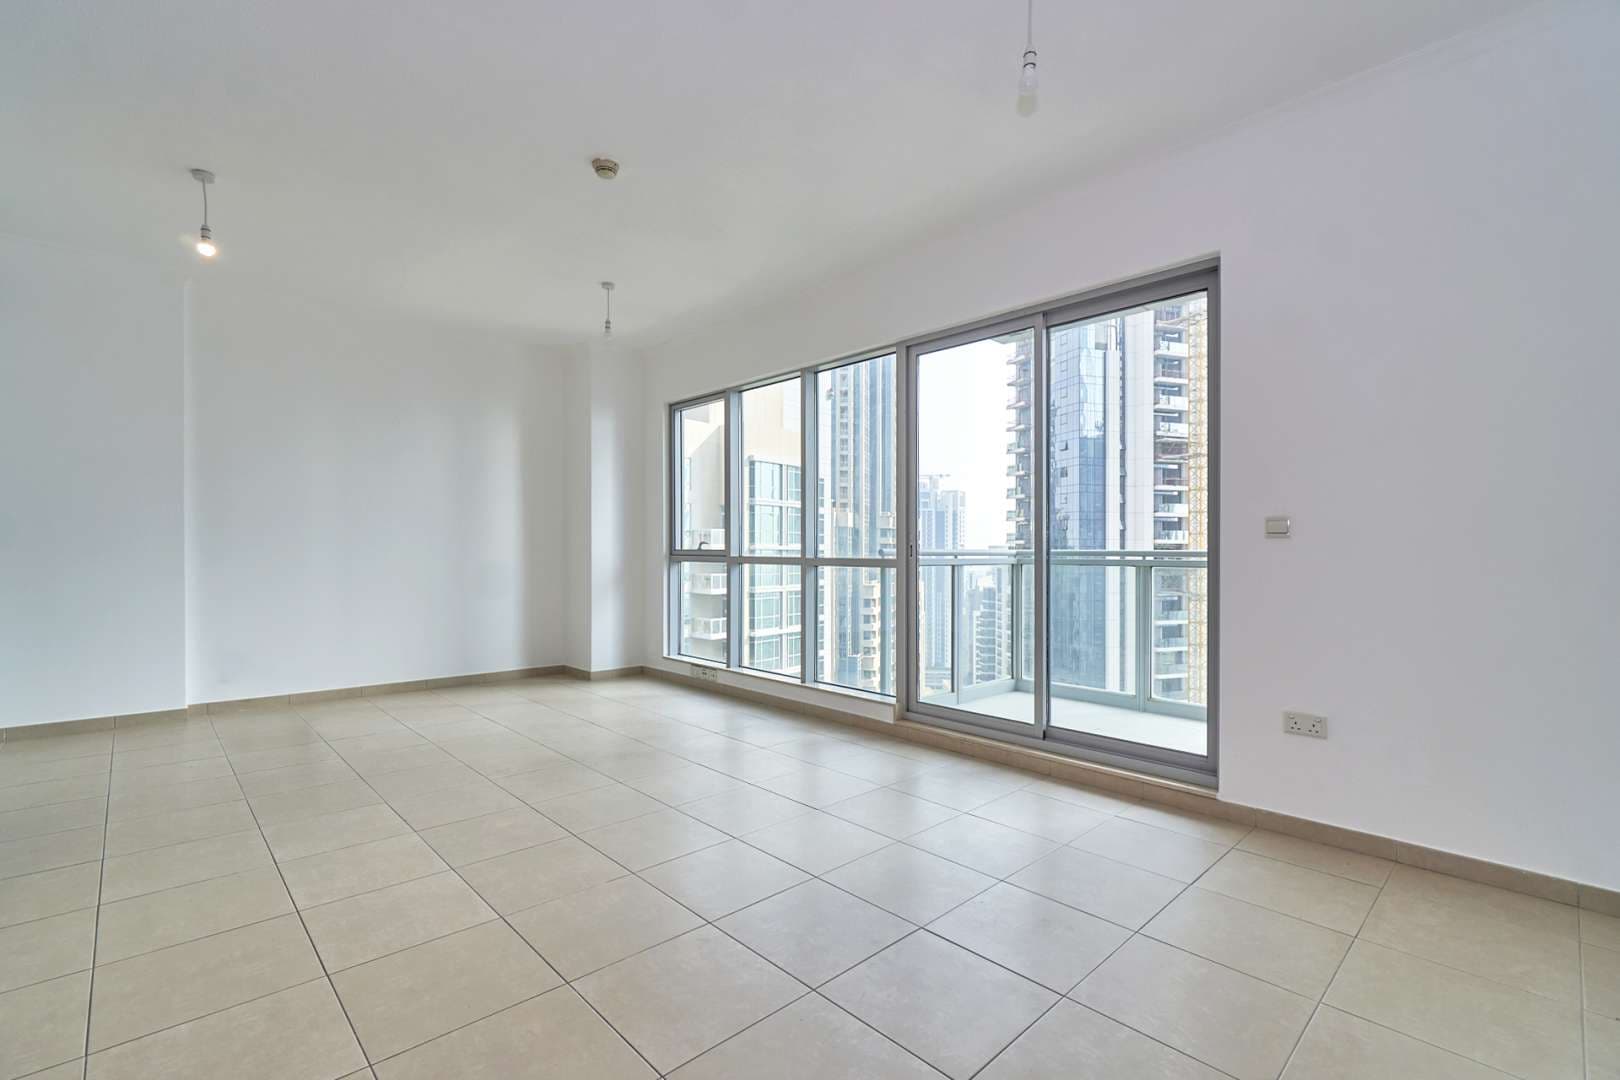 1 Bedroom Apartment For Rent The Residences Lp07968 2691916c9c321400.jpg